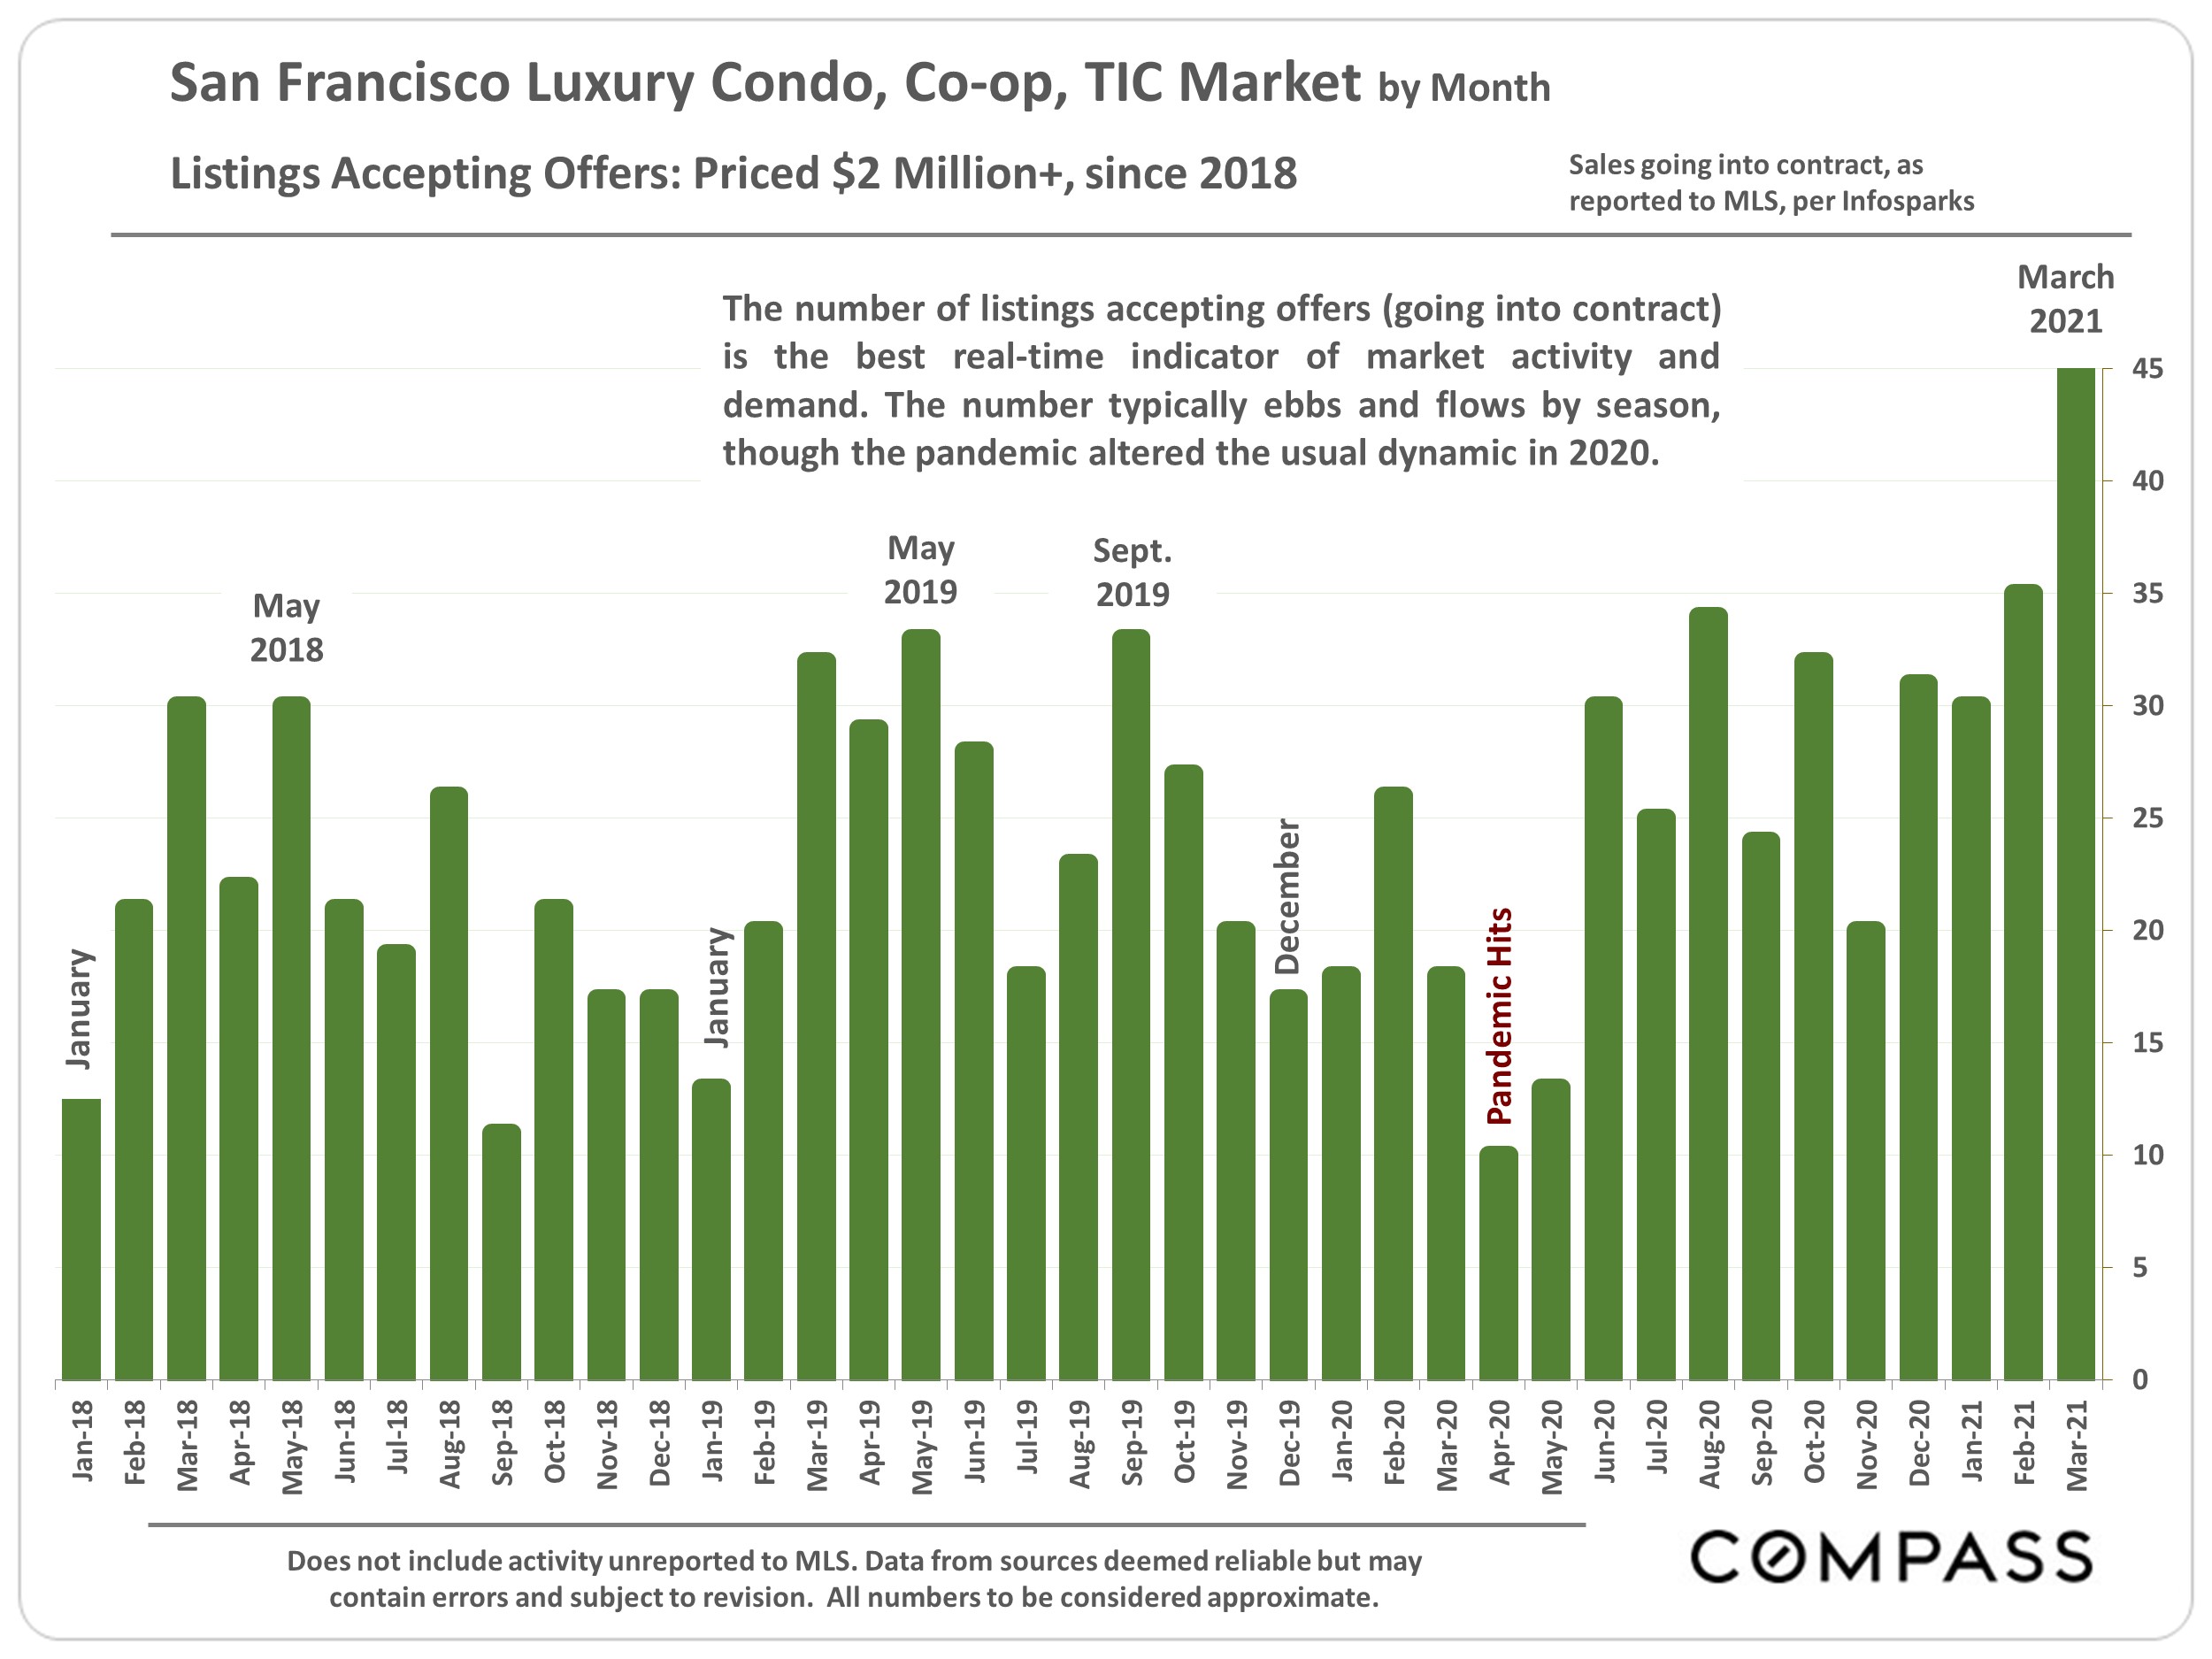 Chart showing the SF Luxury Condo, Co-op, TIC Market by Month, Listings Accepting Offers Priced $2M+ since 2018